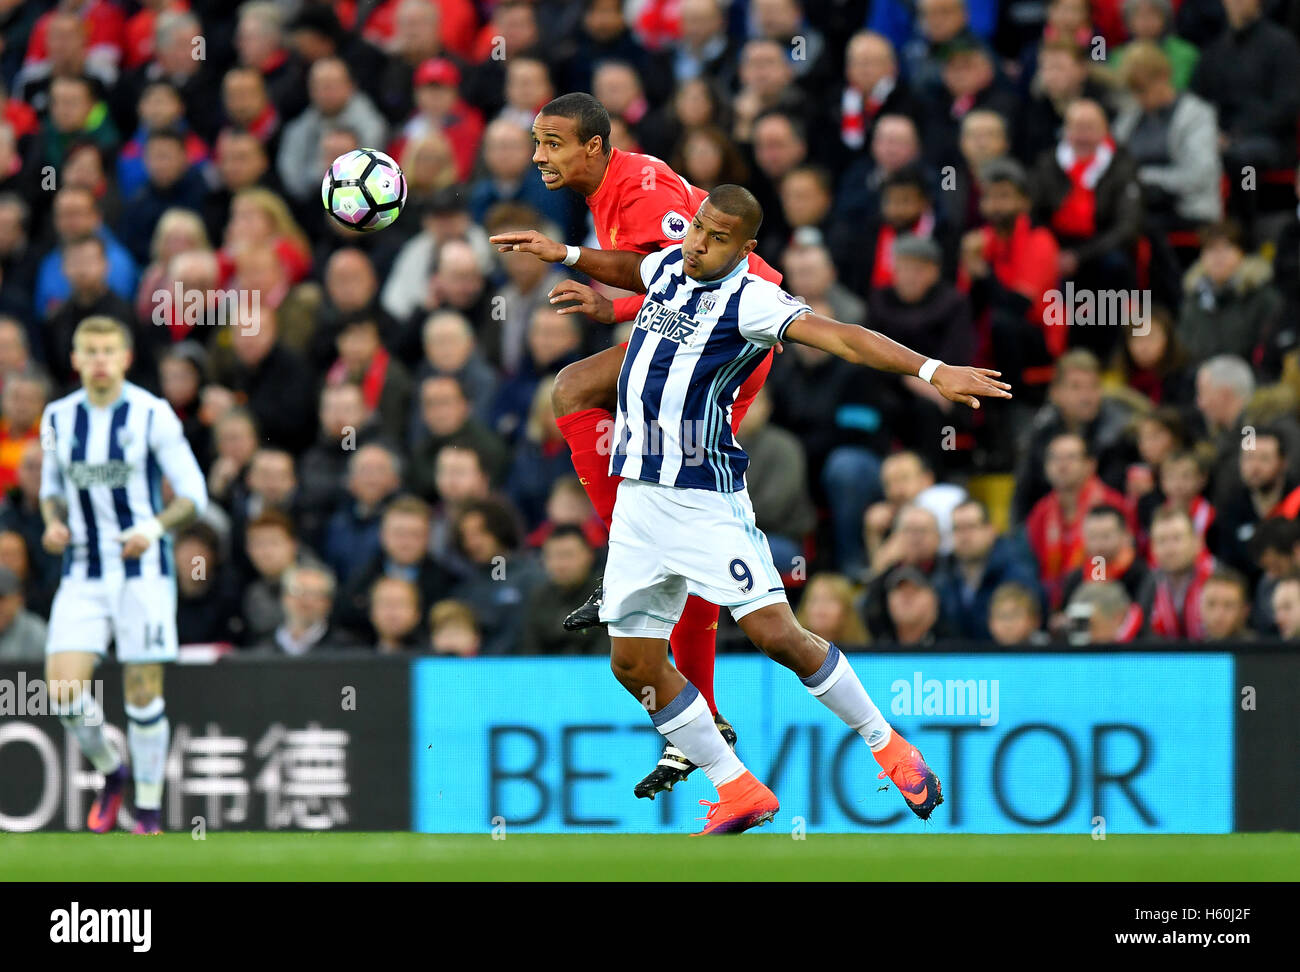 Liverpool's Joel Matip (back) and West Bromwich Albion's Jose Salomon Rondon battle for the ball during the Premier League match at Anfield, Liverpool. Stock Photo